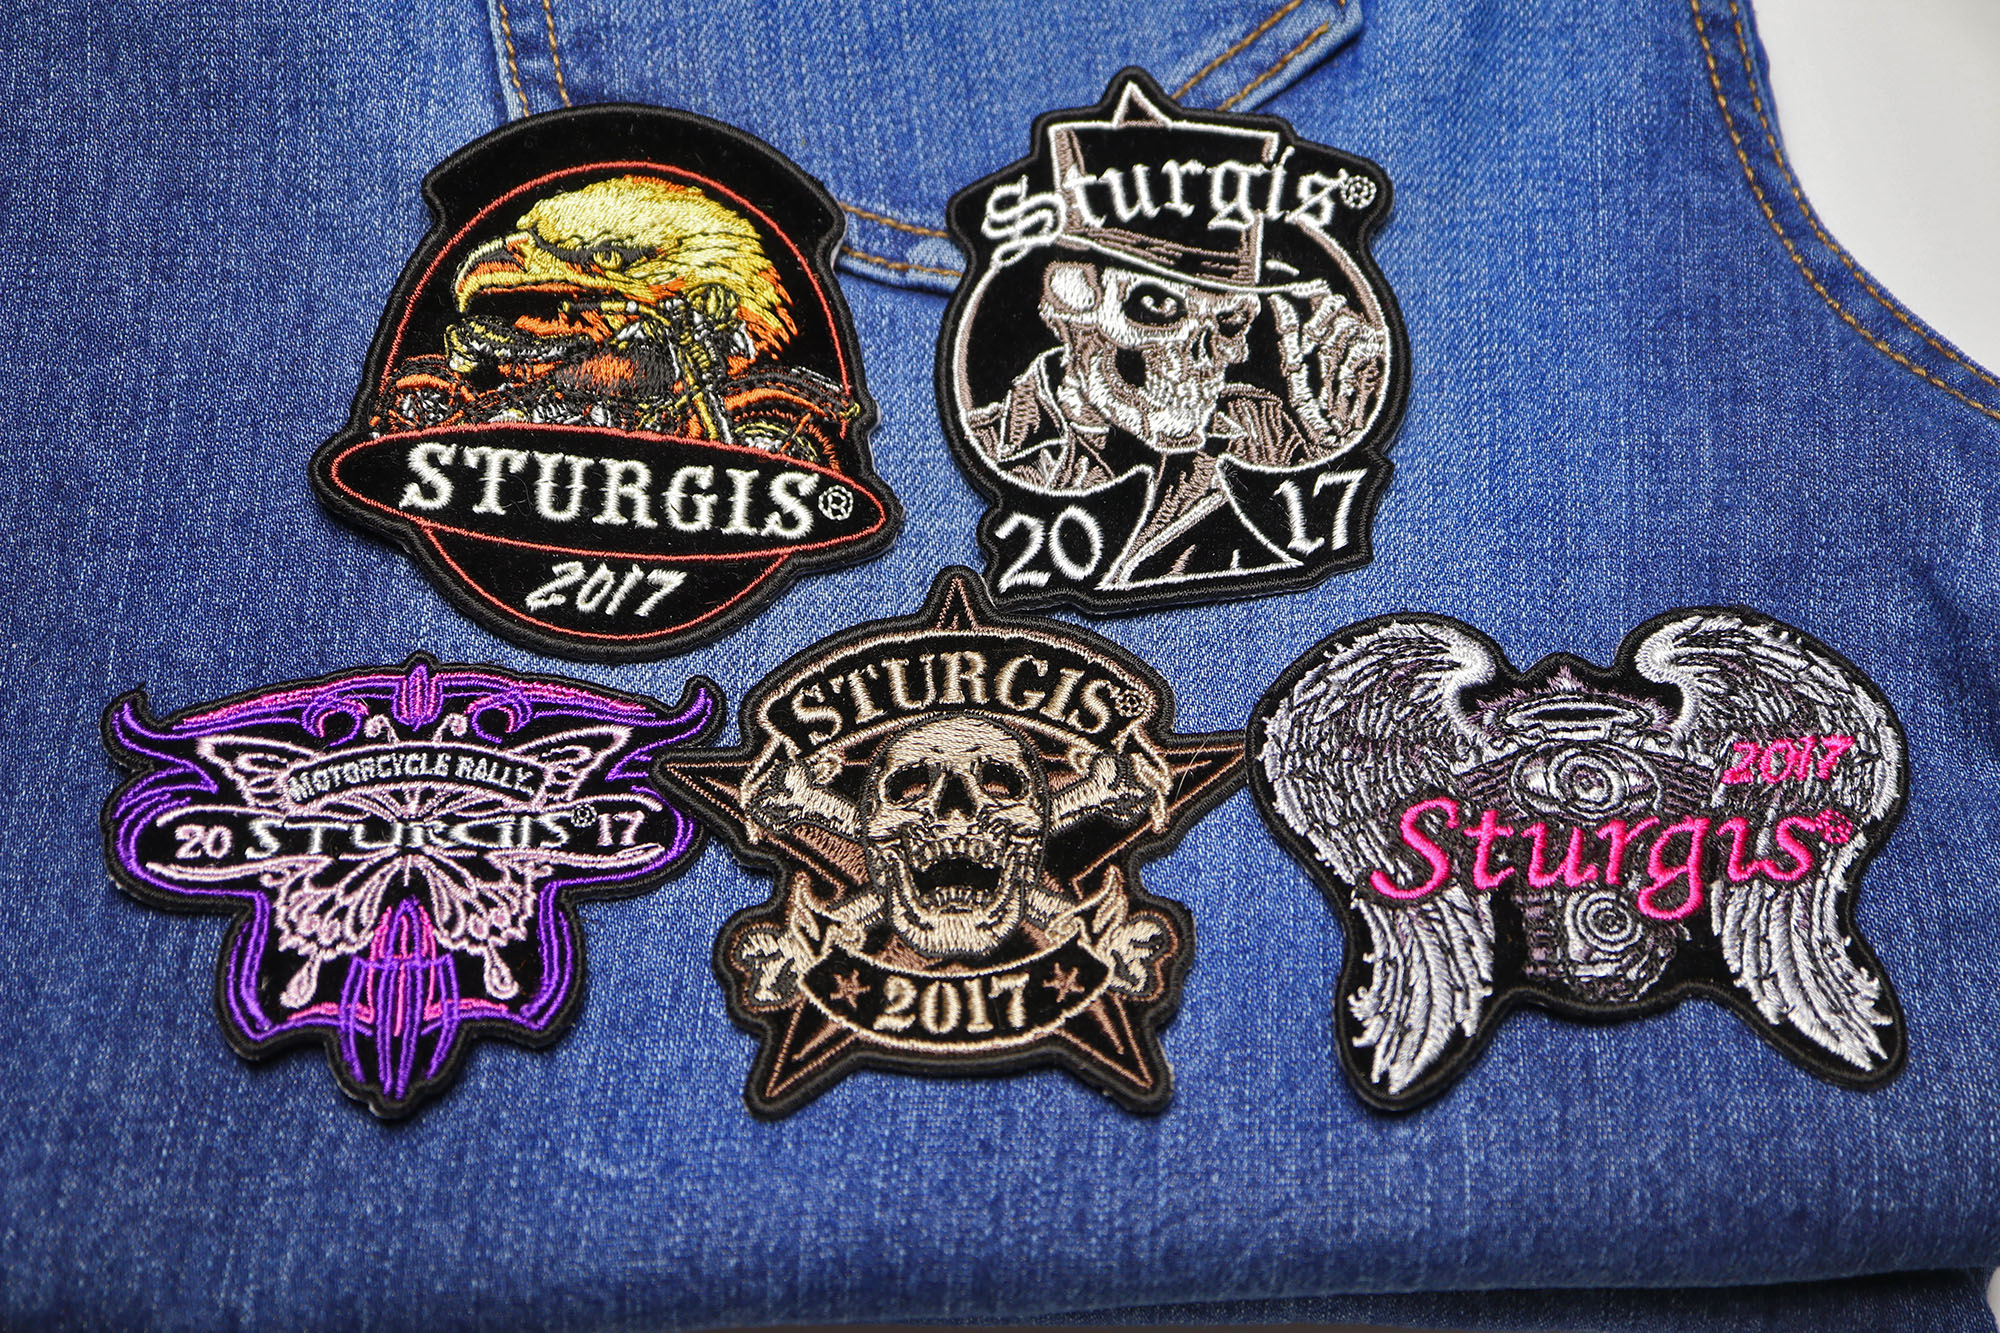 Sturgis 2017 Past Rally Patches Available While Stocks Last